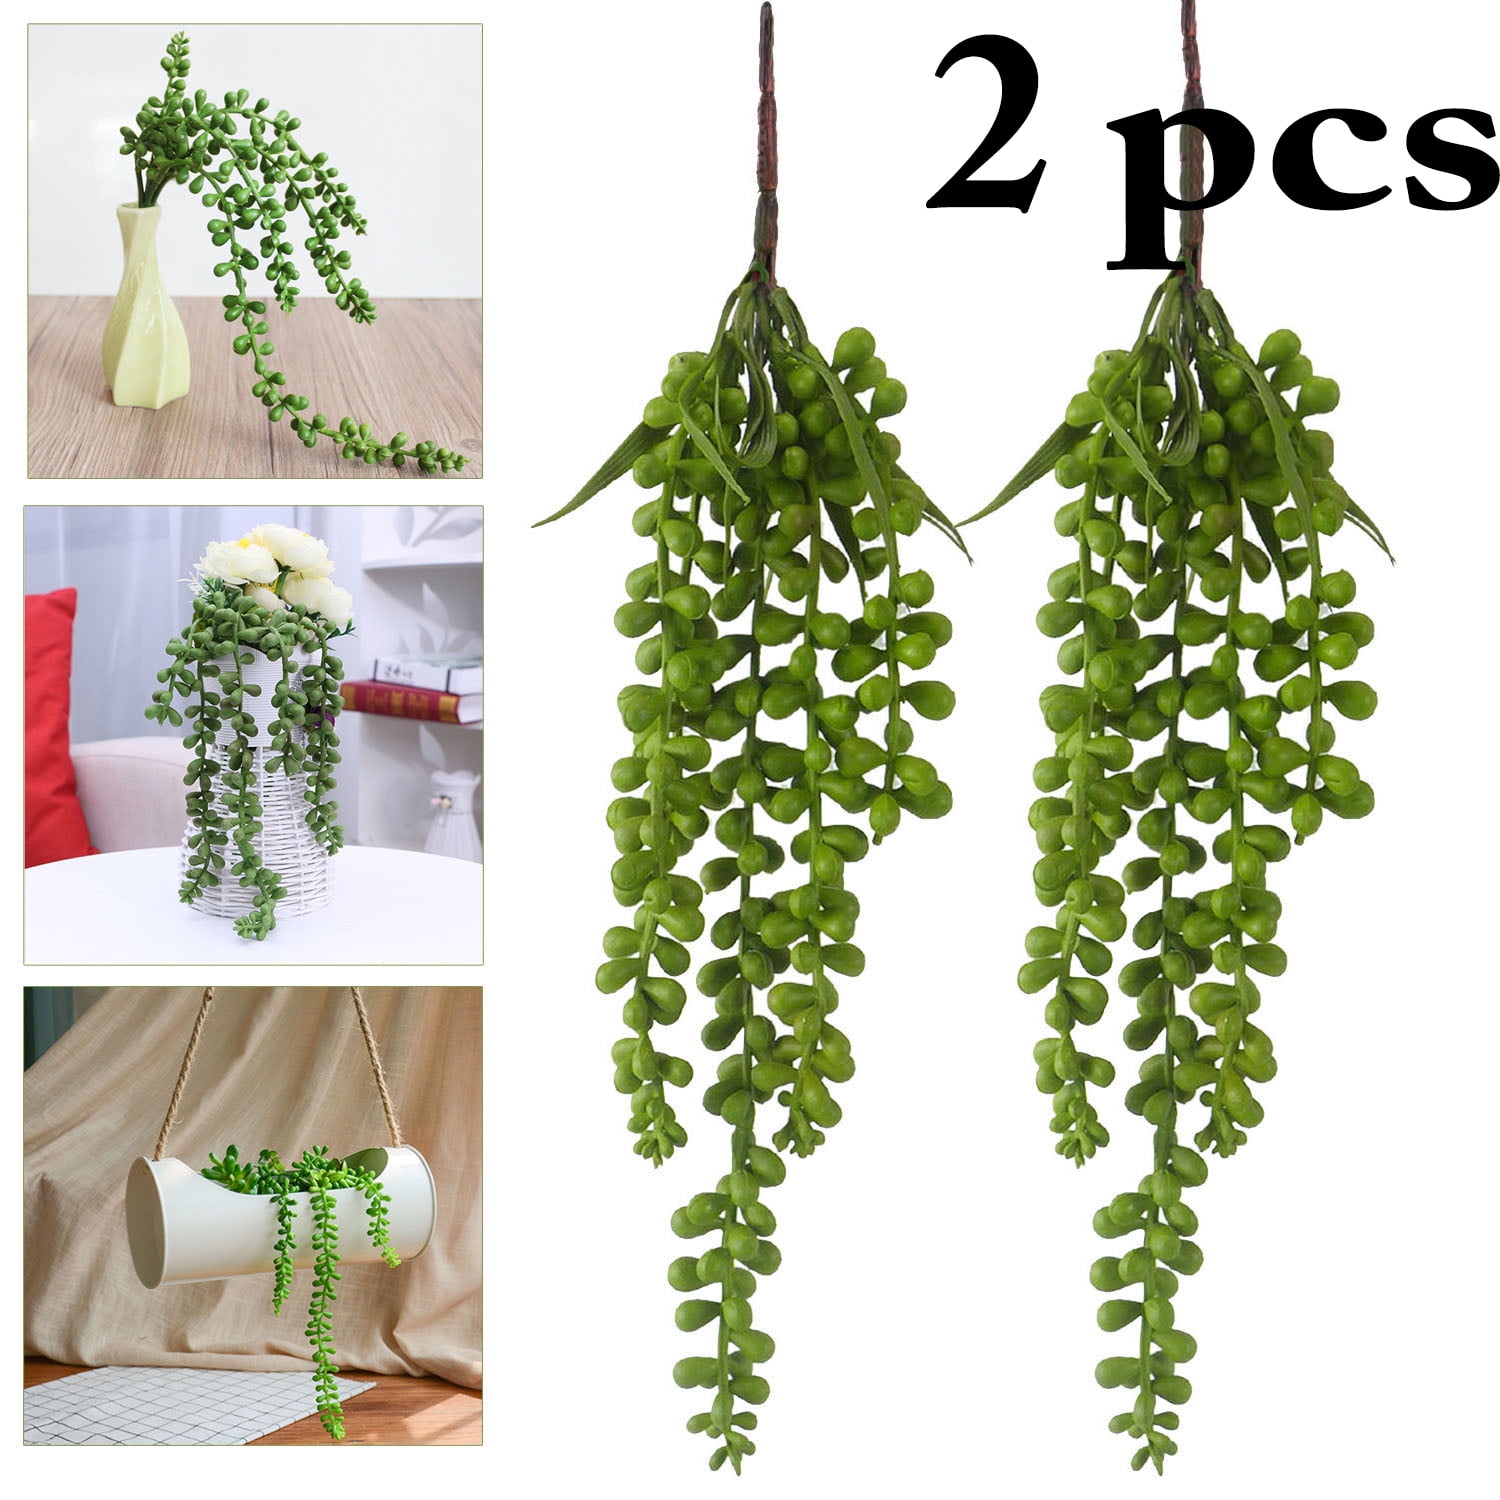 Artificial Succulent Plants Vine String Pearls Hanging Plant Home/Office Decor 